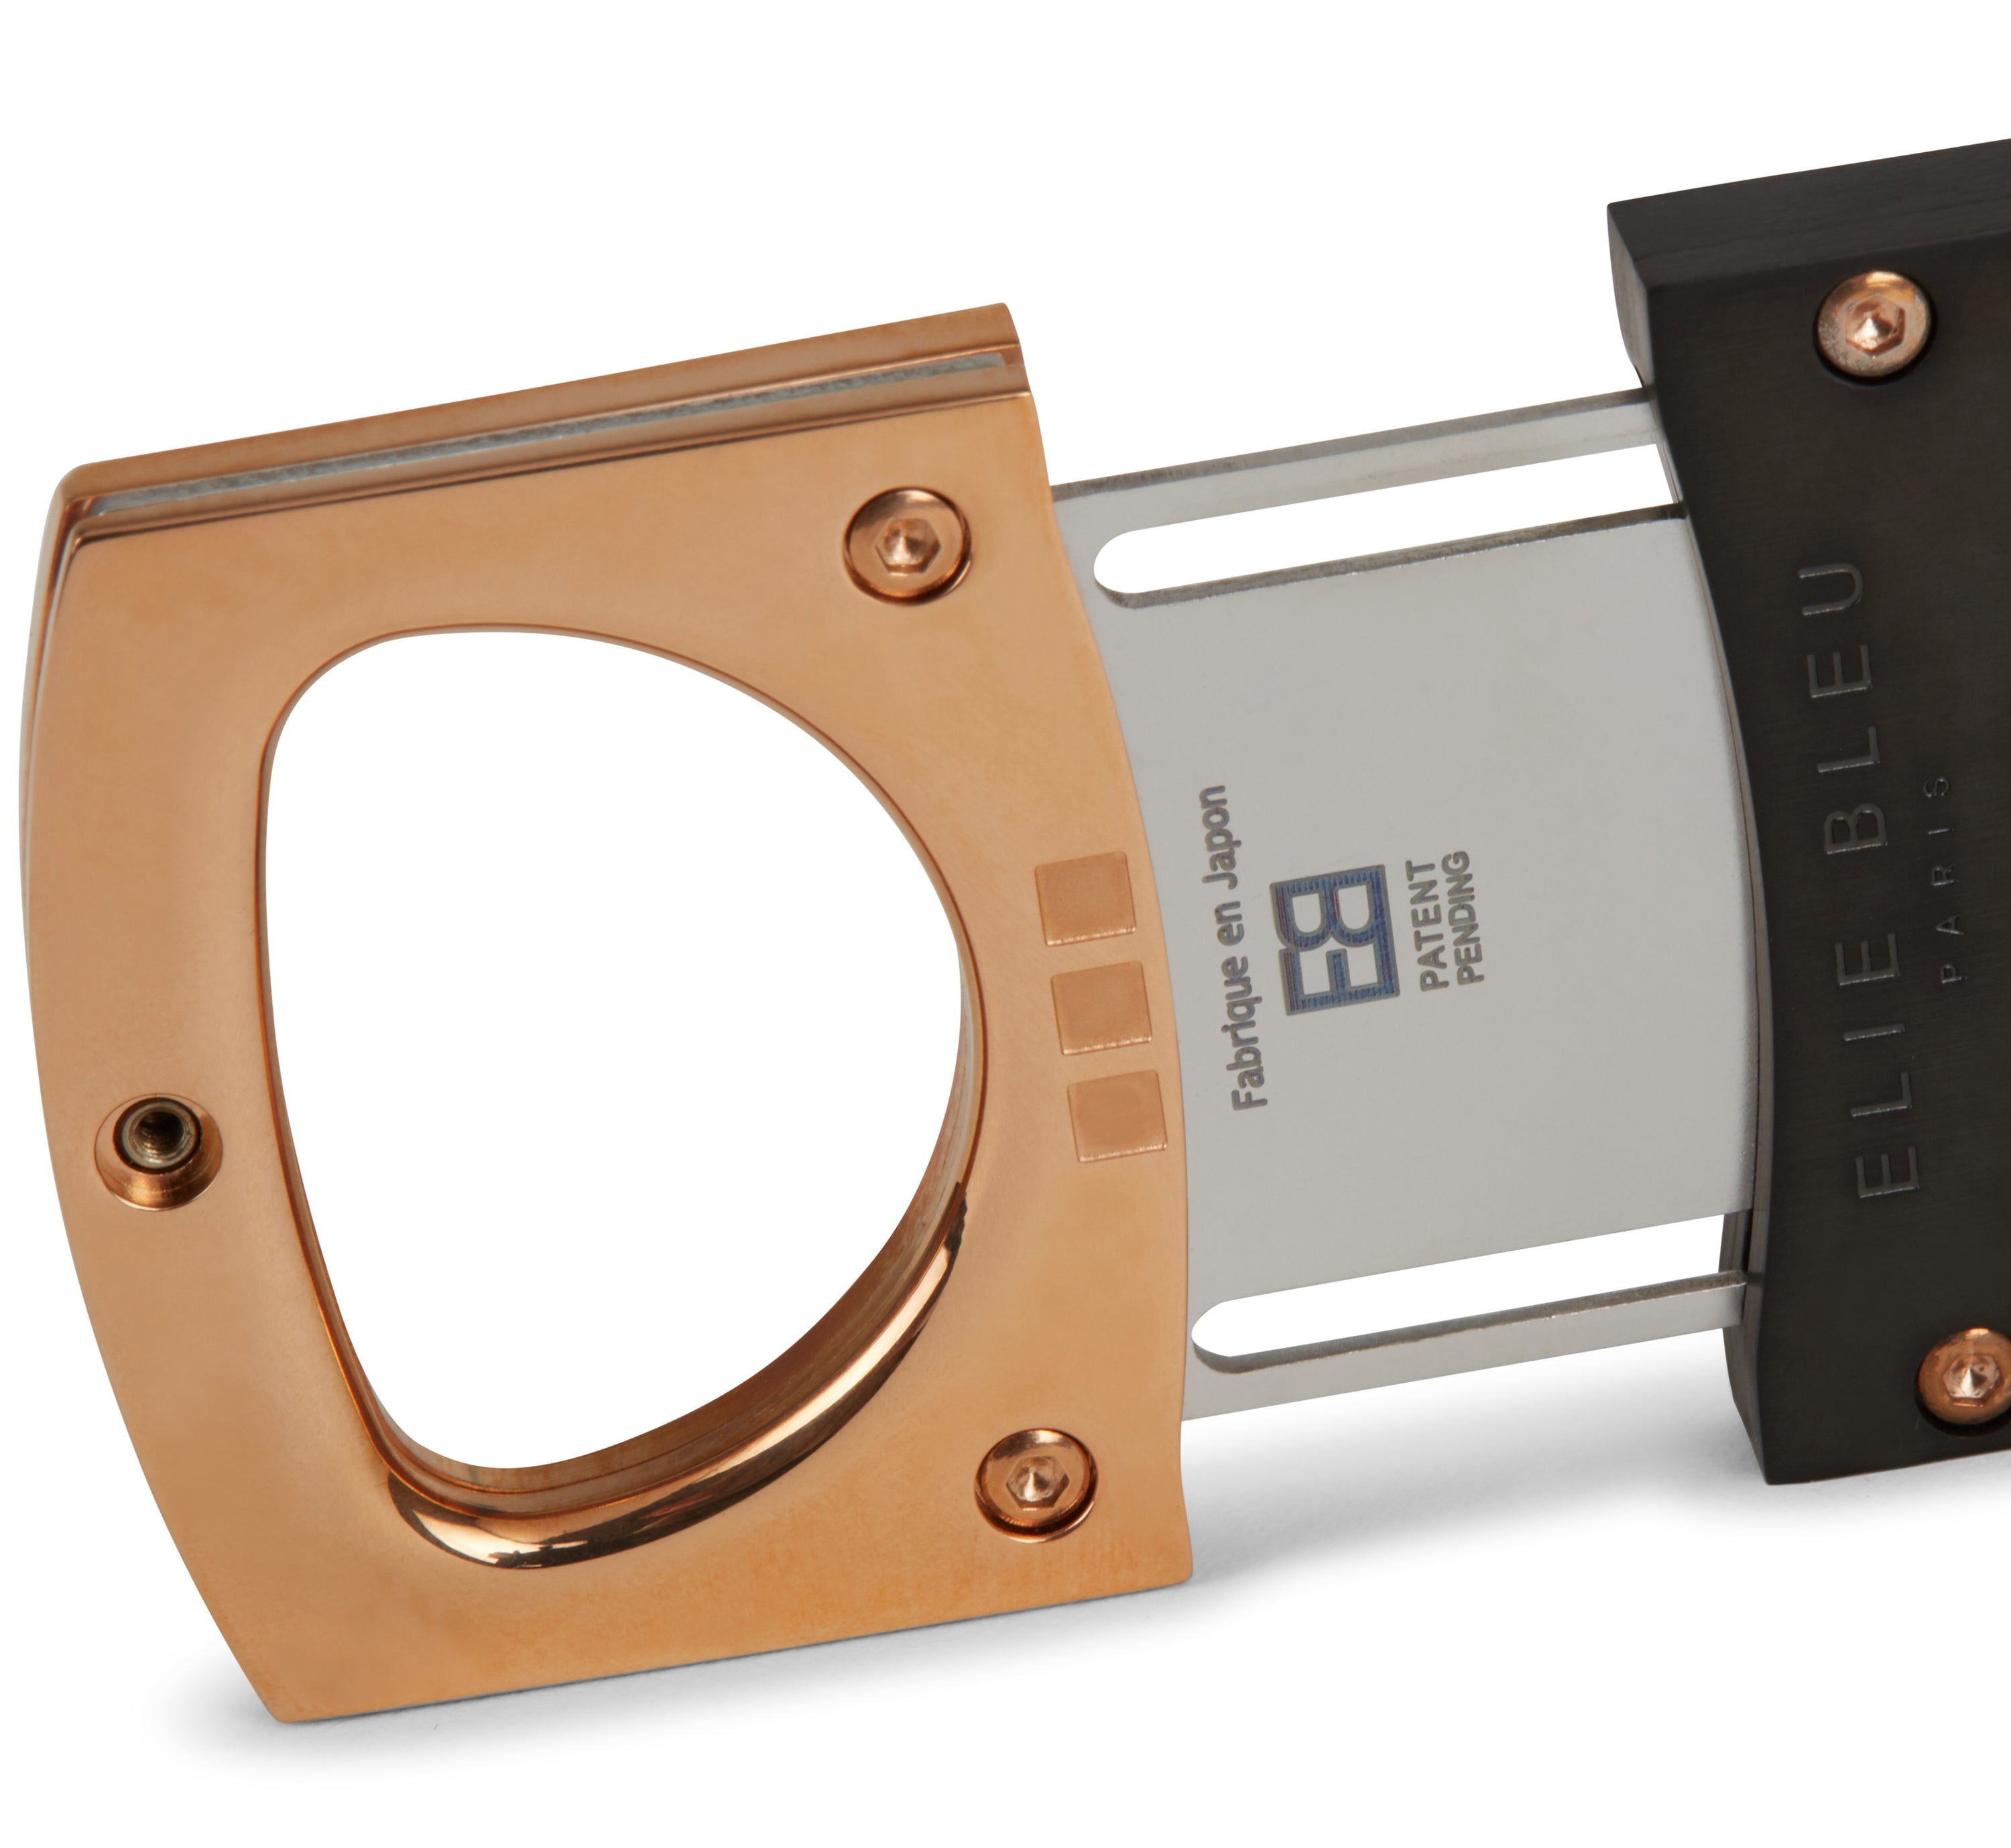 Cigar Cutter - Two-Tone Double Blade